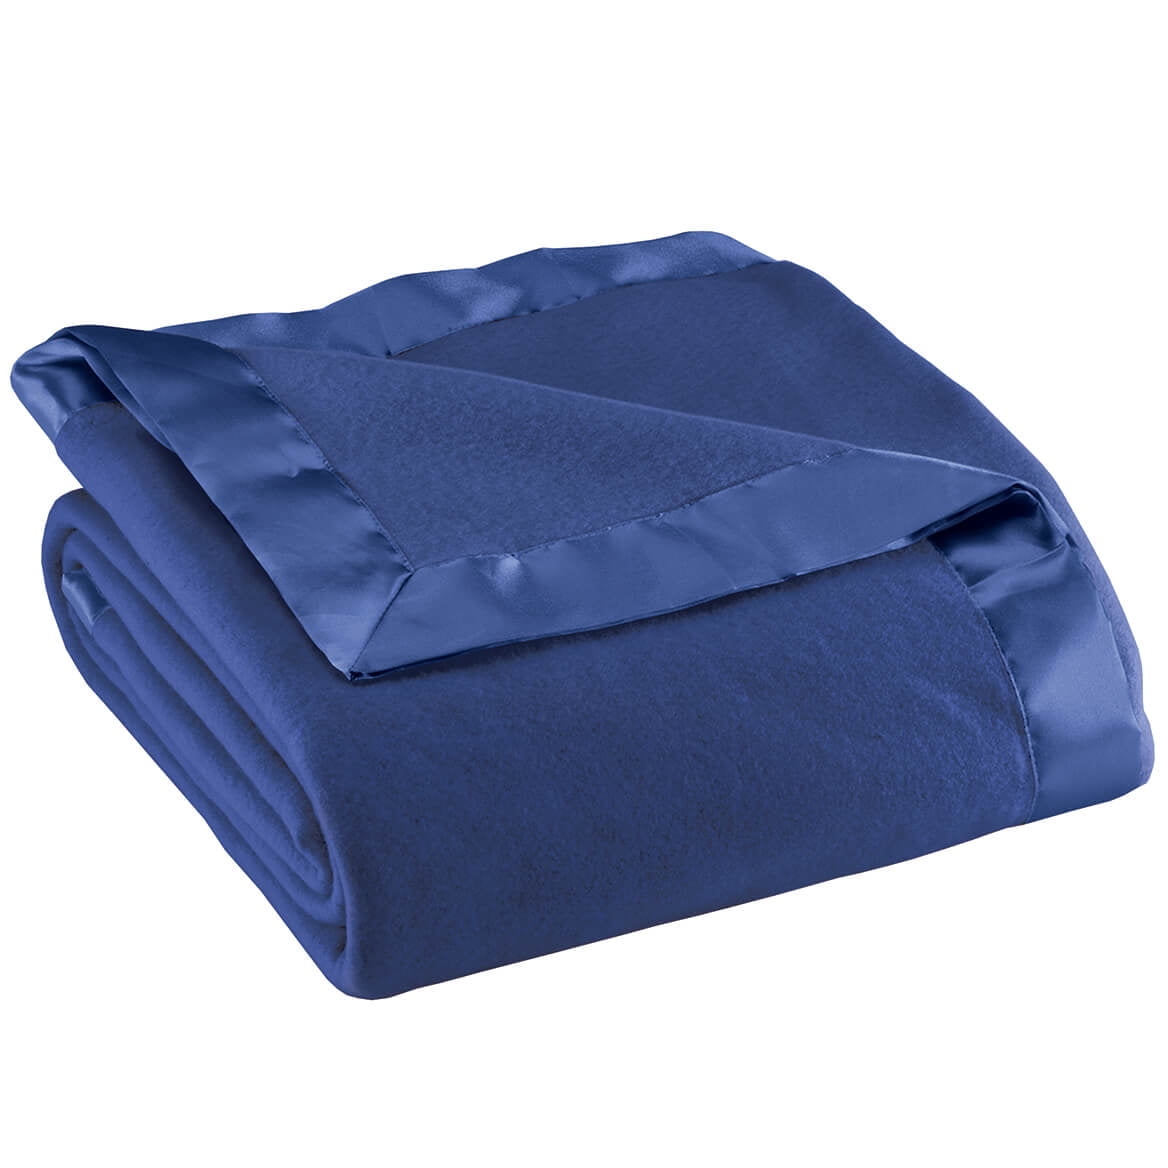 Satin Fleece Blanket by OakRidge, Full/Queen, Twin or King Size – 100%  Polyester Lightweight Fabric and Cozy Satin Binding Edges in Tightly  Folding